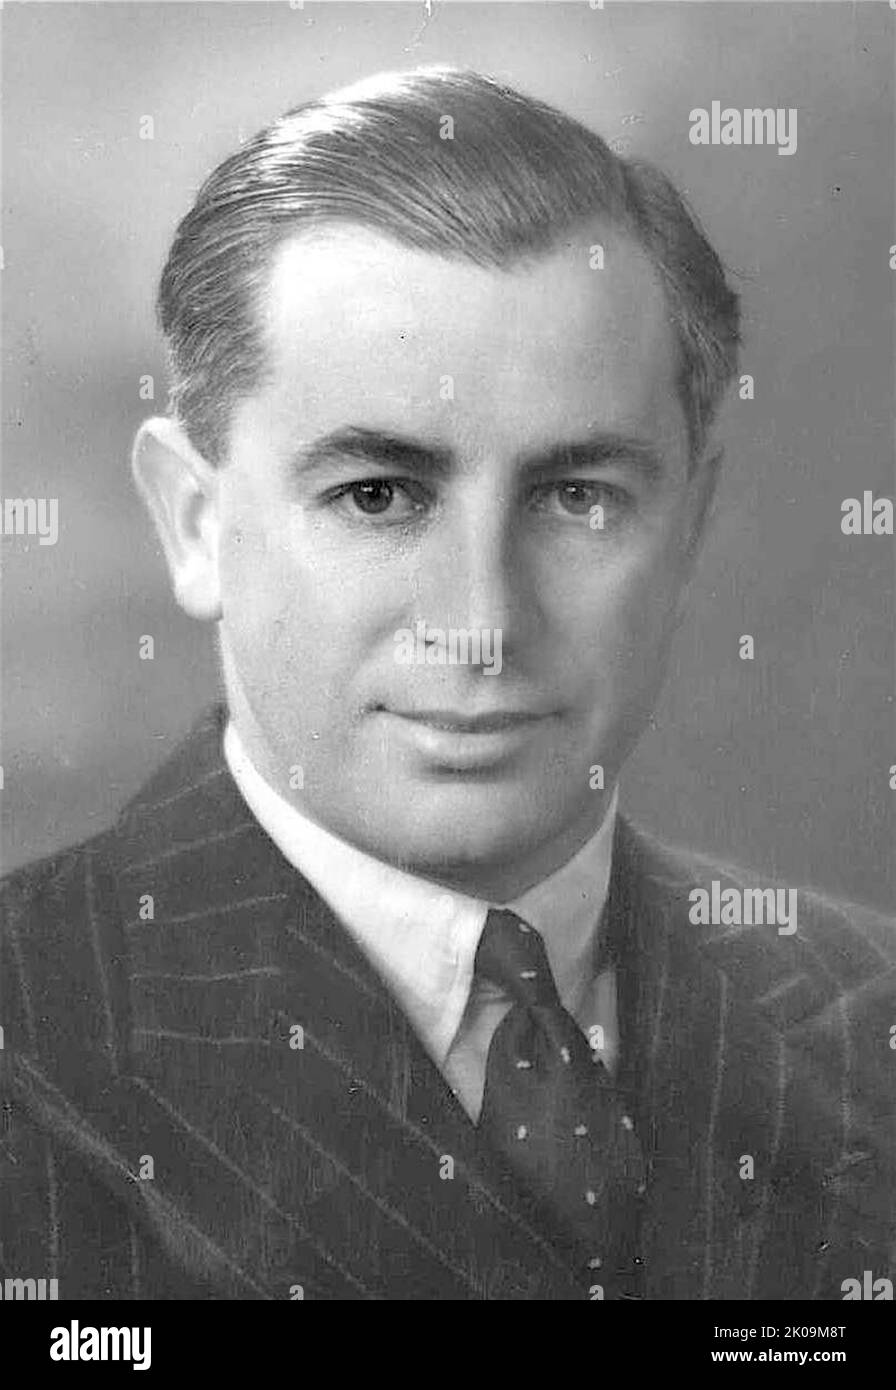 Harold Edward Holt (5 August 1908 - 17 December 1967) was an Australian politician who served as the 17th prime minister of Australia from 1966 until his disappearance in 1967. He held office as leader of the Liberal Party of Australia. Stock Photo